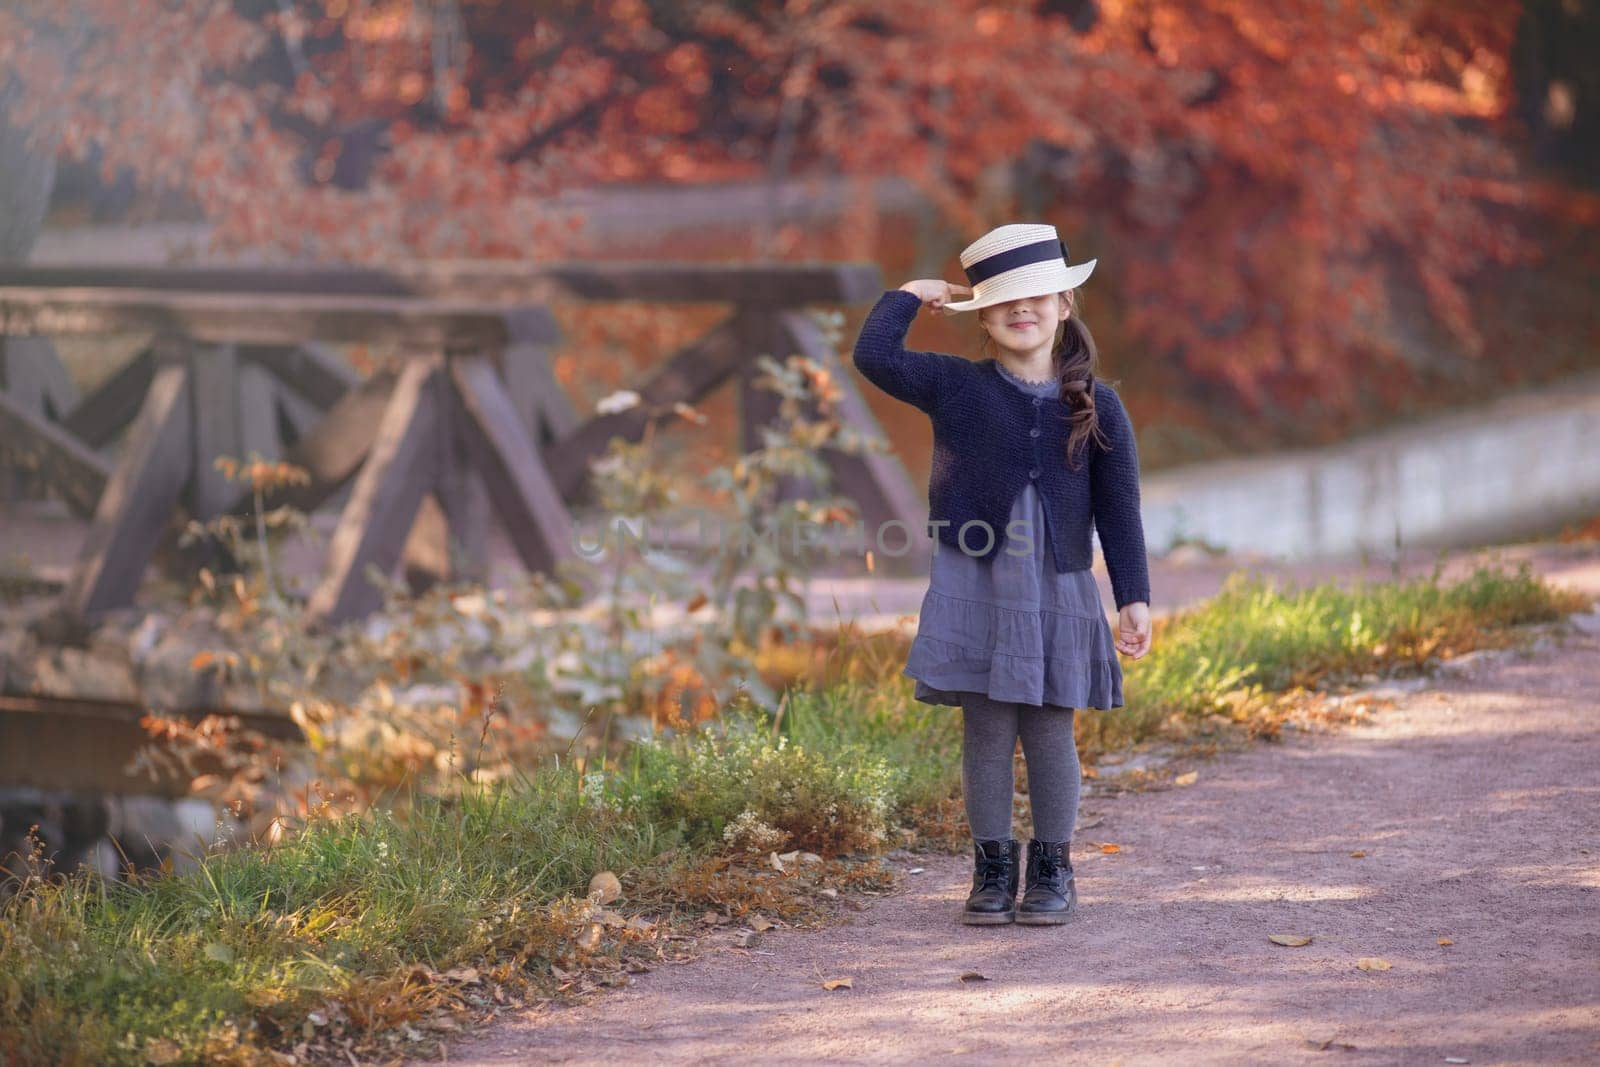 A funny little girl stands smiling in vintage clothing, closed her eyes with a straw hat, a gray dress and a knitted blouse against a background of park and red foliage in autumn. Copy space